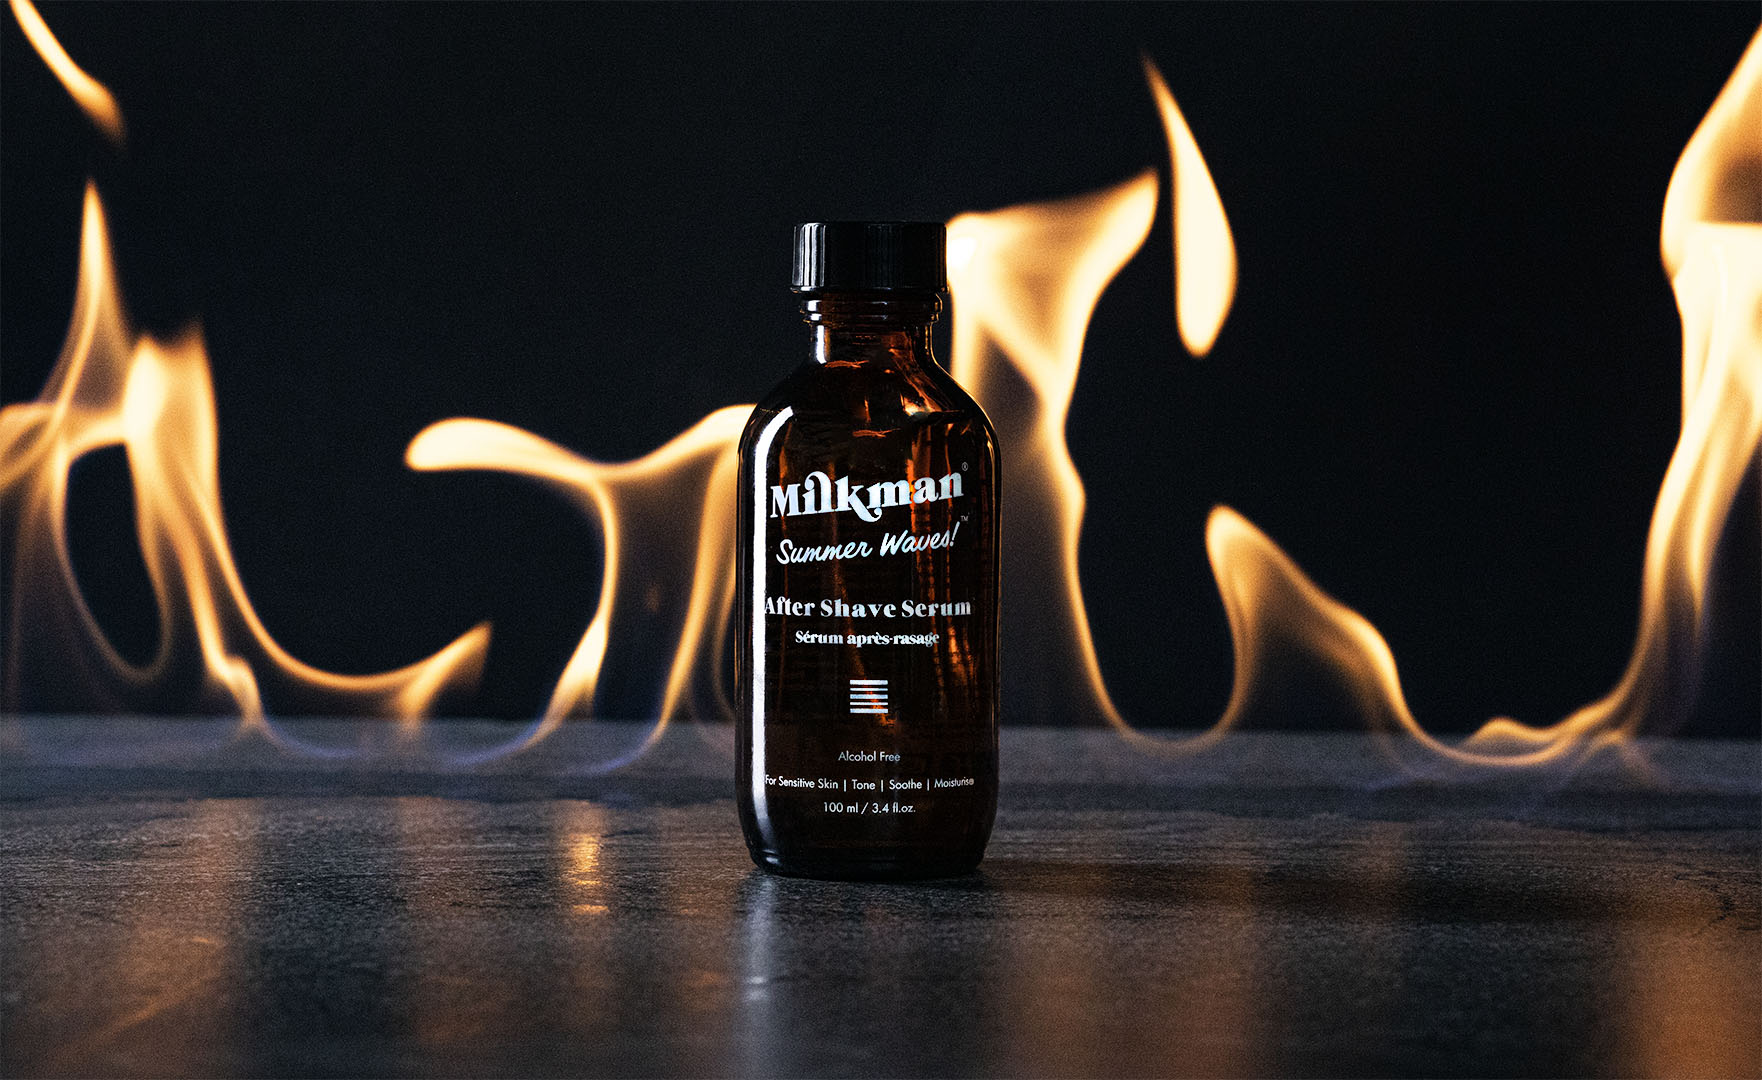 milkman after shave serum surrounded by flames depicting razor burn